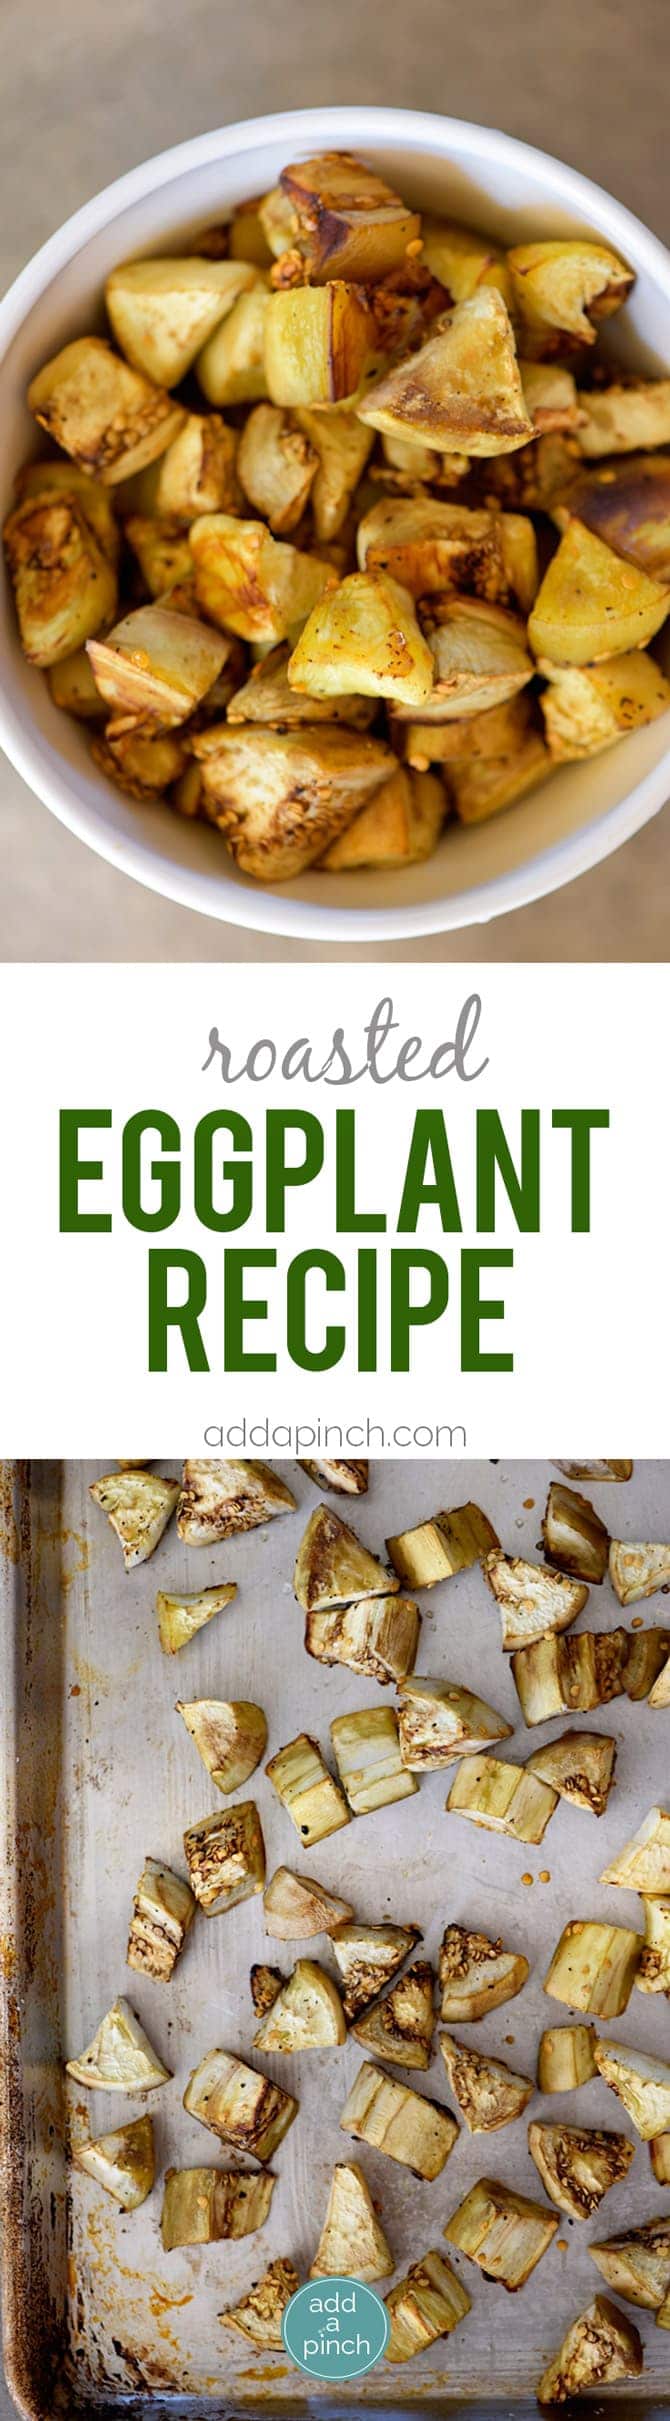 Roasted Eggplant Recipe - Roasted Eggplant makes an easy and delicious dish on its own or to use in so many other recipes! // addapinch.com